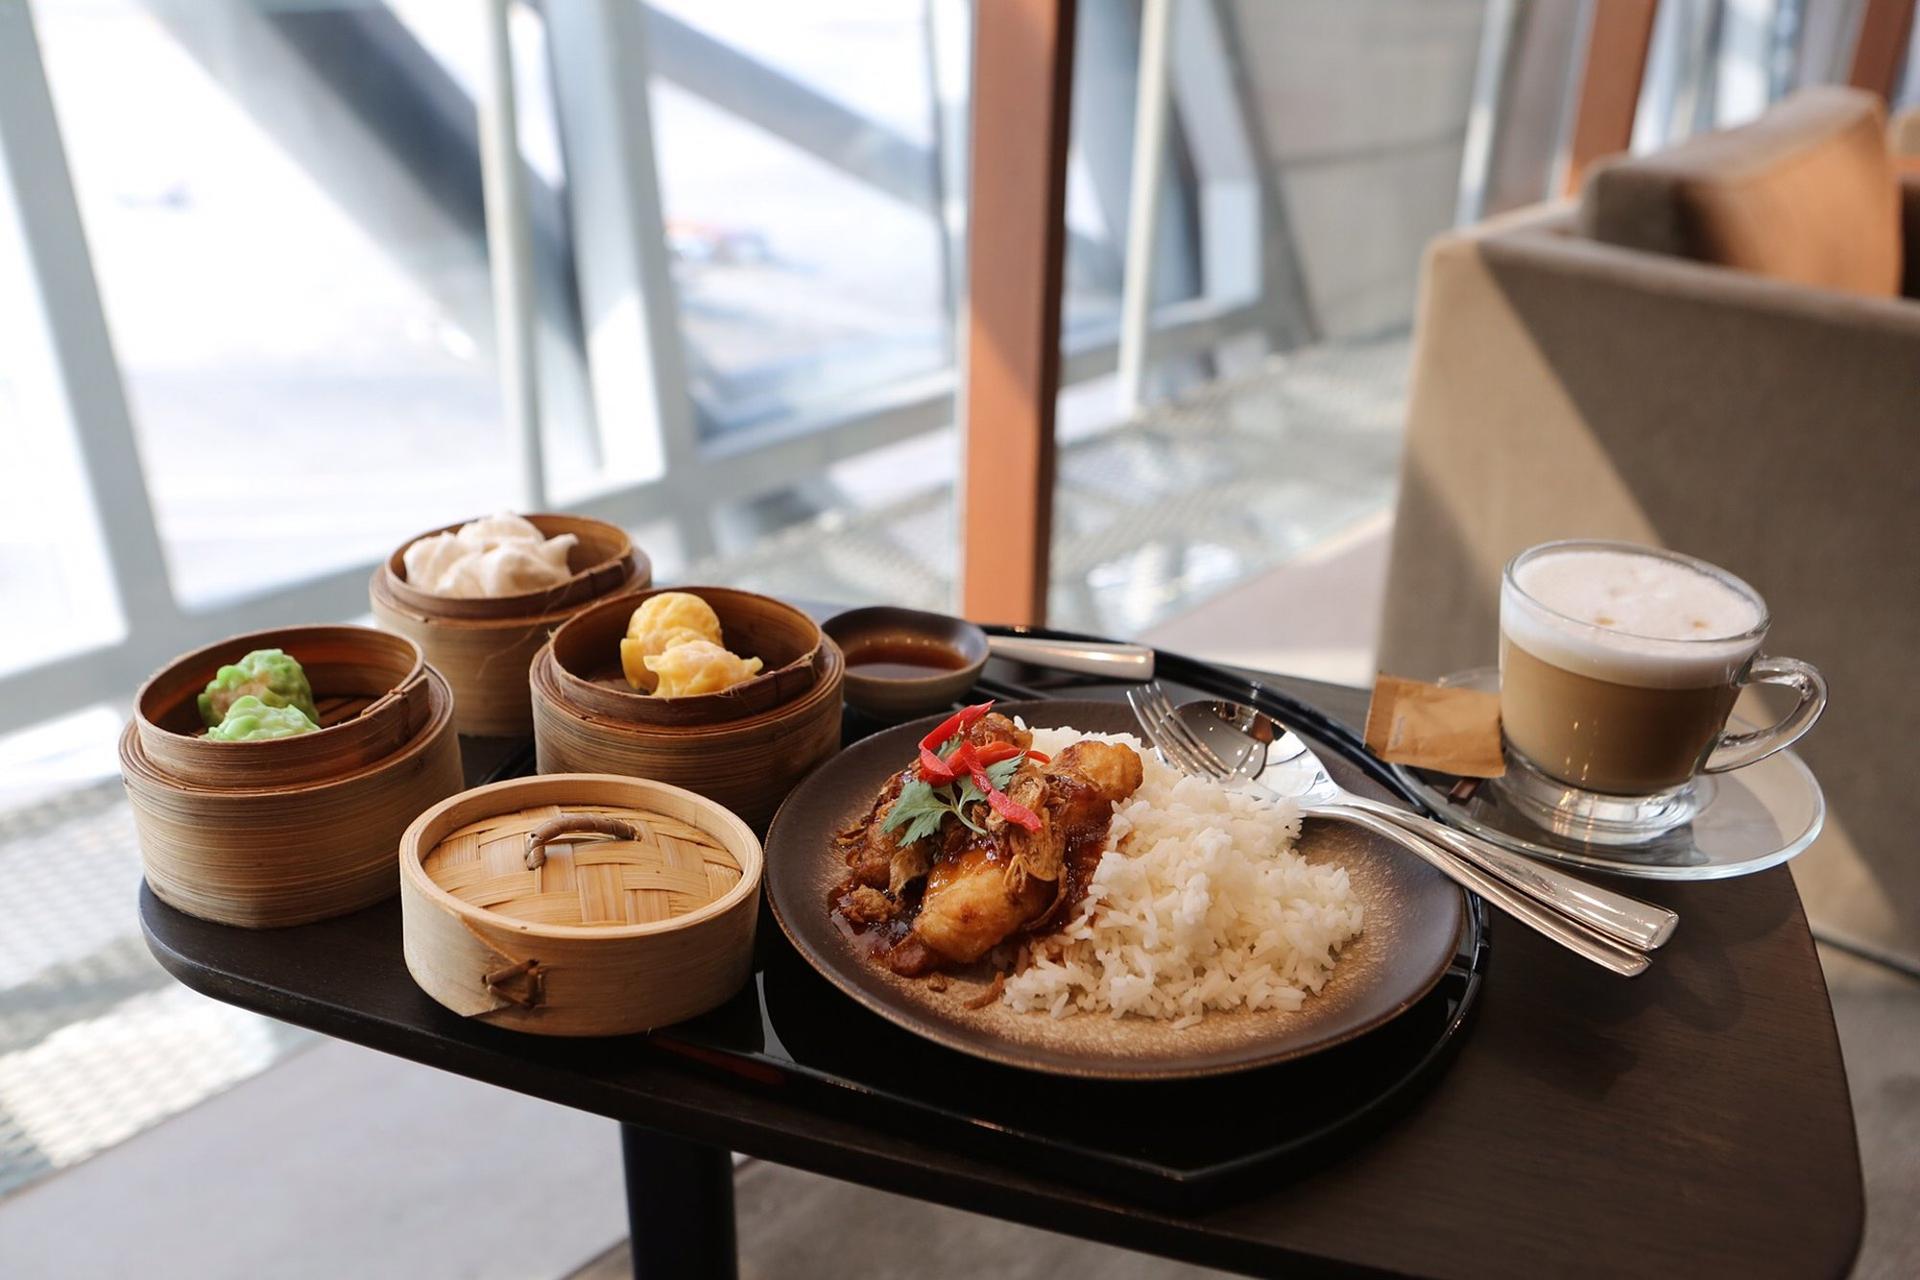 Cathay Pacific First and Business Class Lounge image 44 of 69